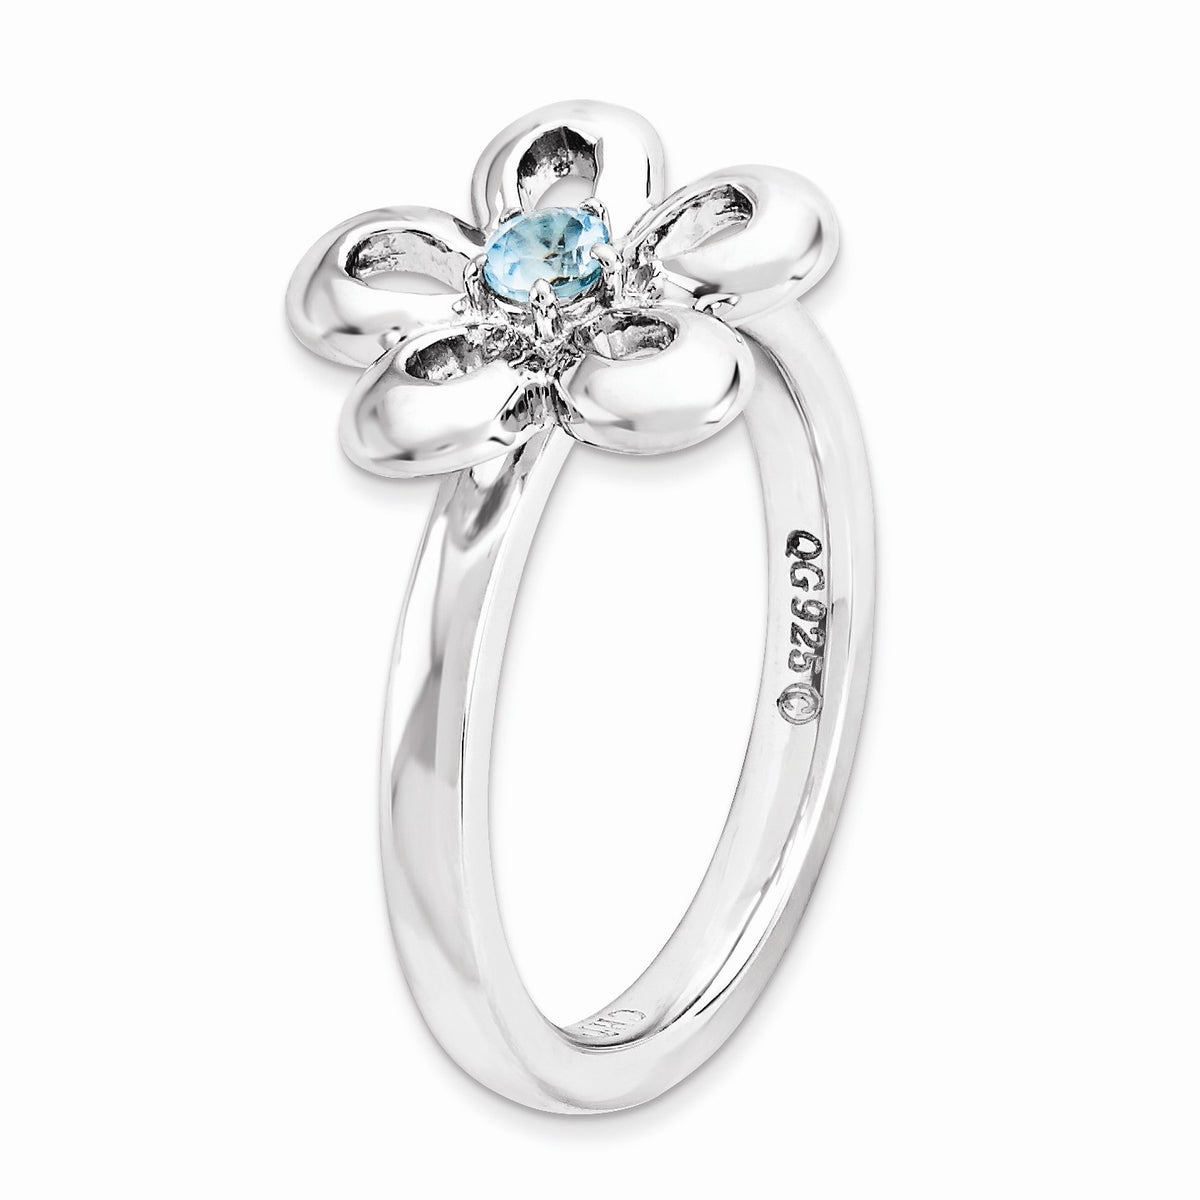 Alternate view of the Silver Stackable 13mm 1/10 Carat Blue Topaz Flower Ring by The Black Bow Jewelry Co.